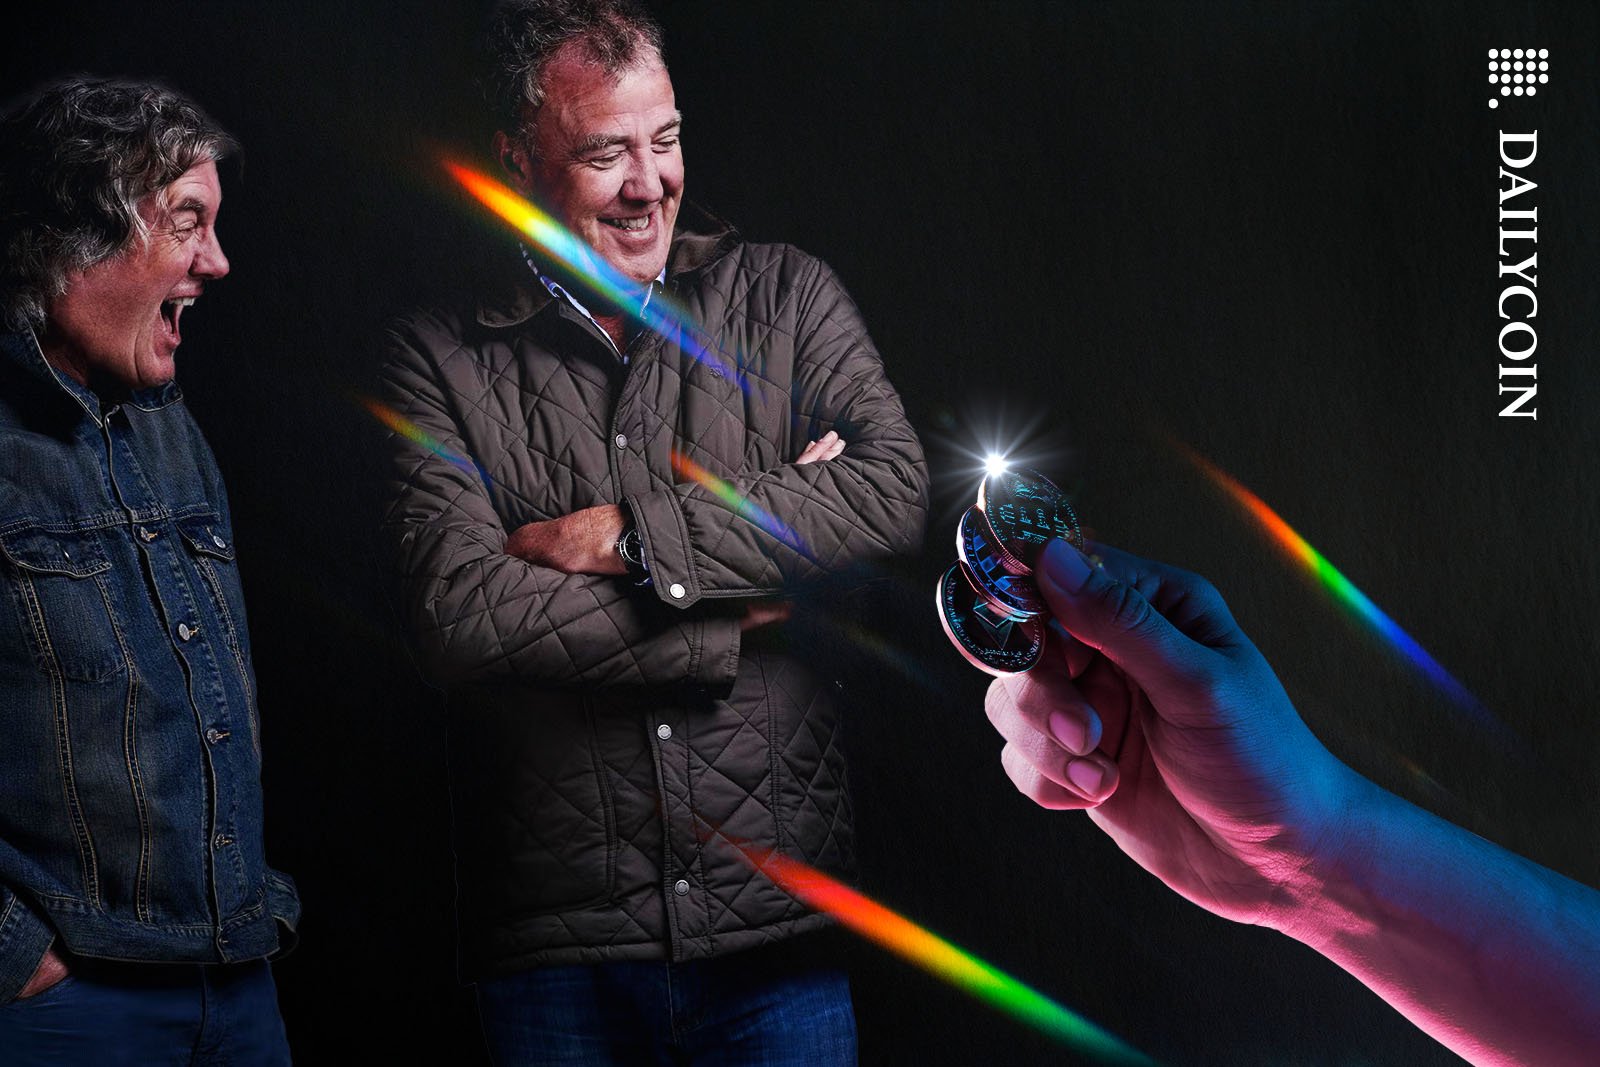 Jeremy Clarkson and James May laughing at a handfull of crypto coins.